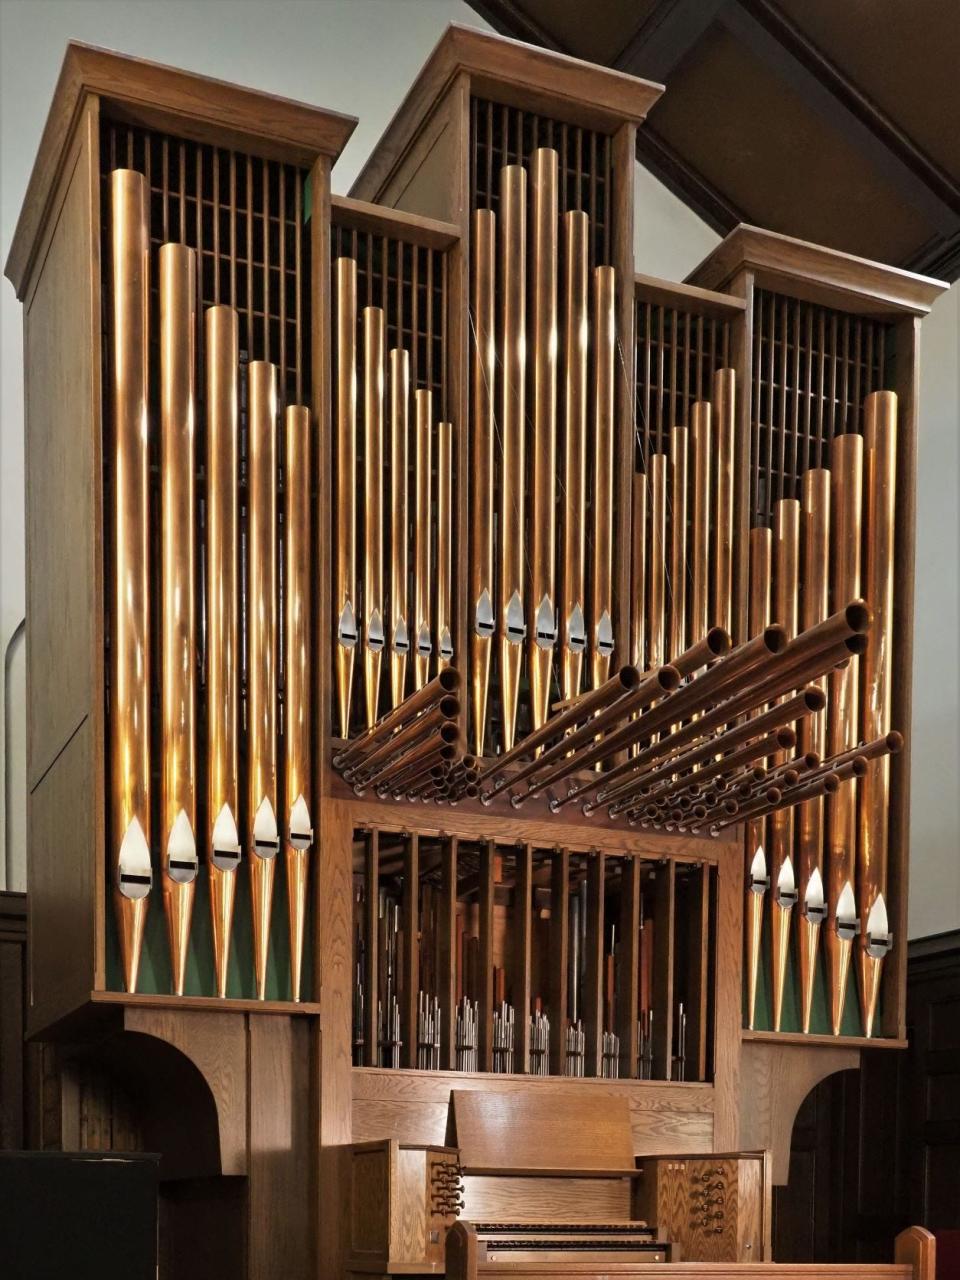 At 3 p.m. Sunday, Ames United Church of Christ will celebrate the 50th anniversary of its tracker-action organ. Organists Charles Sukup, Michael Surratt and Miriam Zach will perform the free, hour-long free concert.